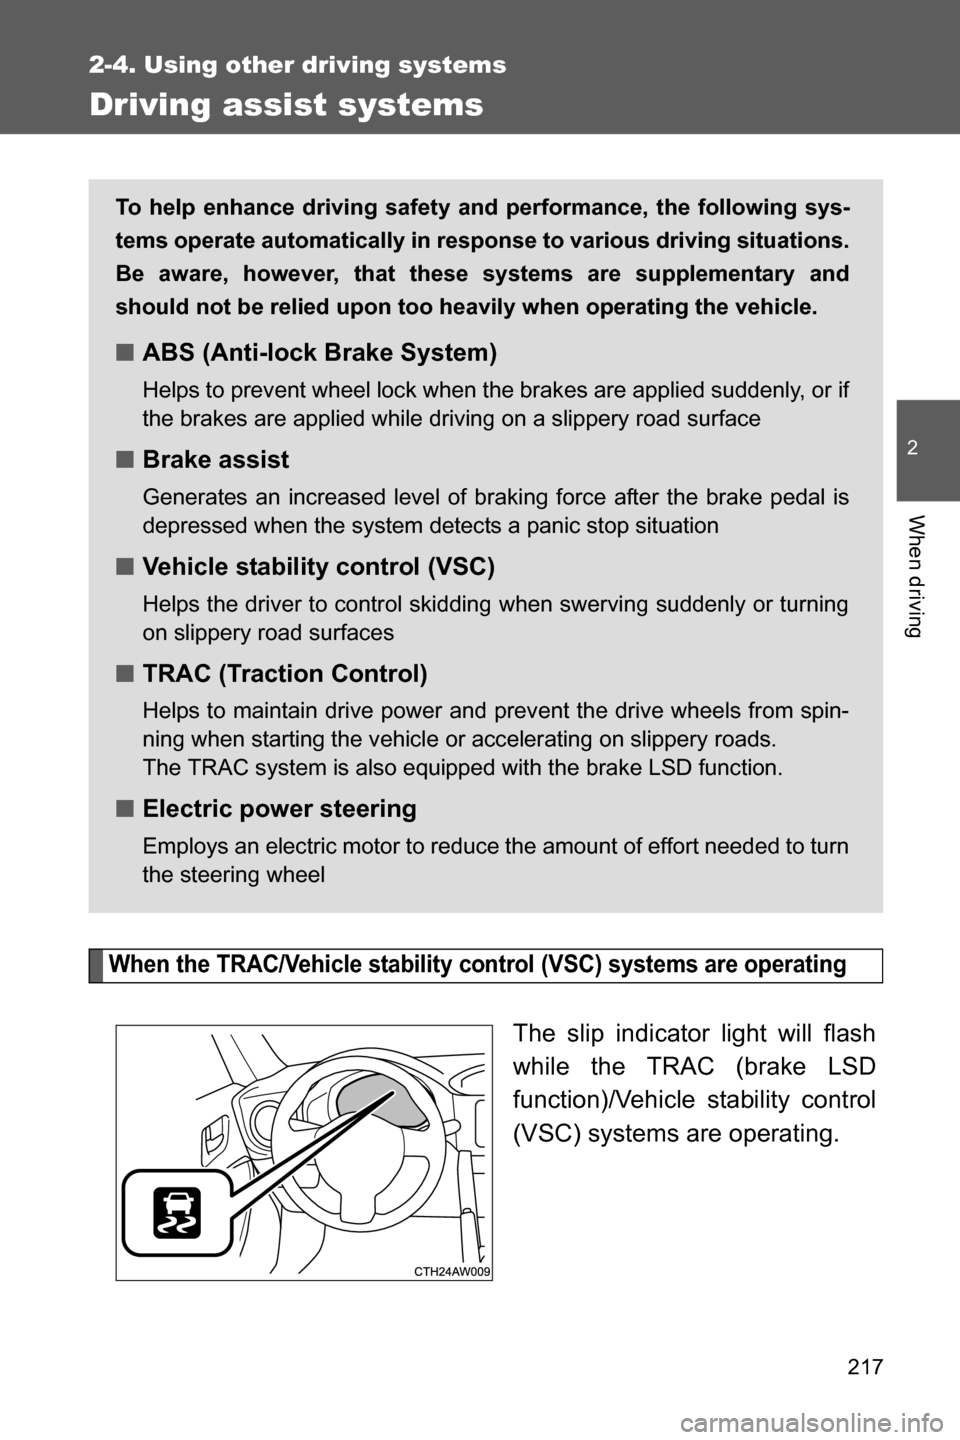 SUBARU BRZ 2016 1.G Owners Manual 217
2-4. Using other driving systems
2
When driving
Driving assist systems
When the TRAC/Vehicle stability control (VSC) systems are operating
The slip indicator light will flash
while the TRAC (brake